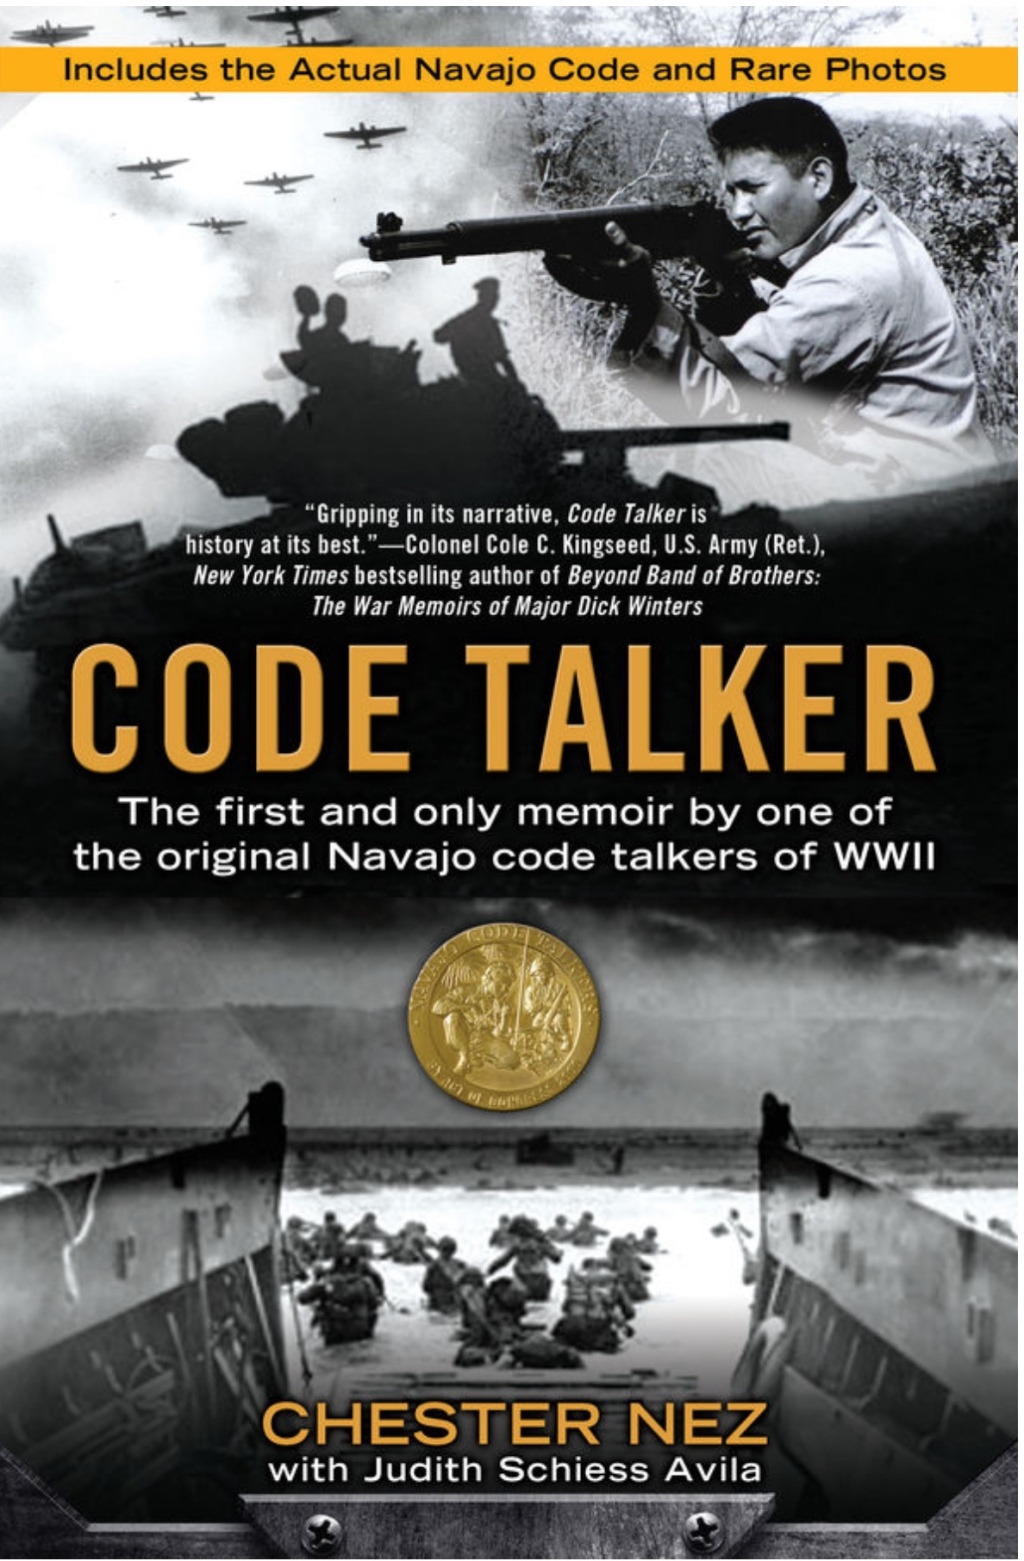 Code Talker: The First and Only Memoir By One of the Original Navajo Code Talkers of WWII